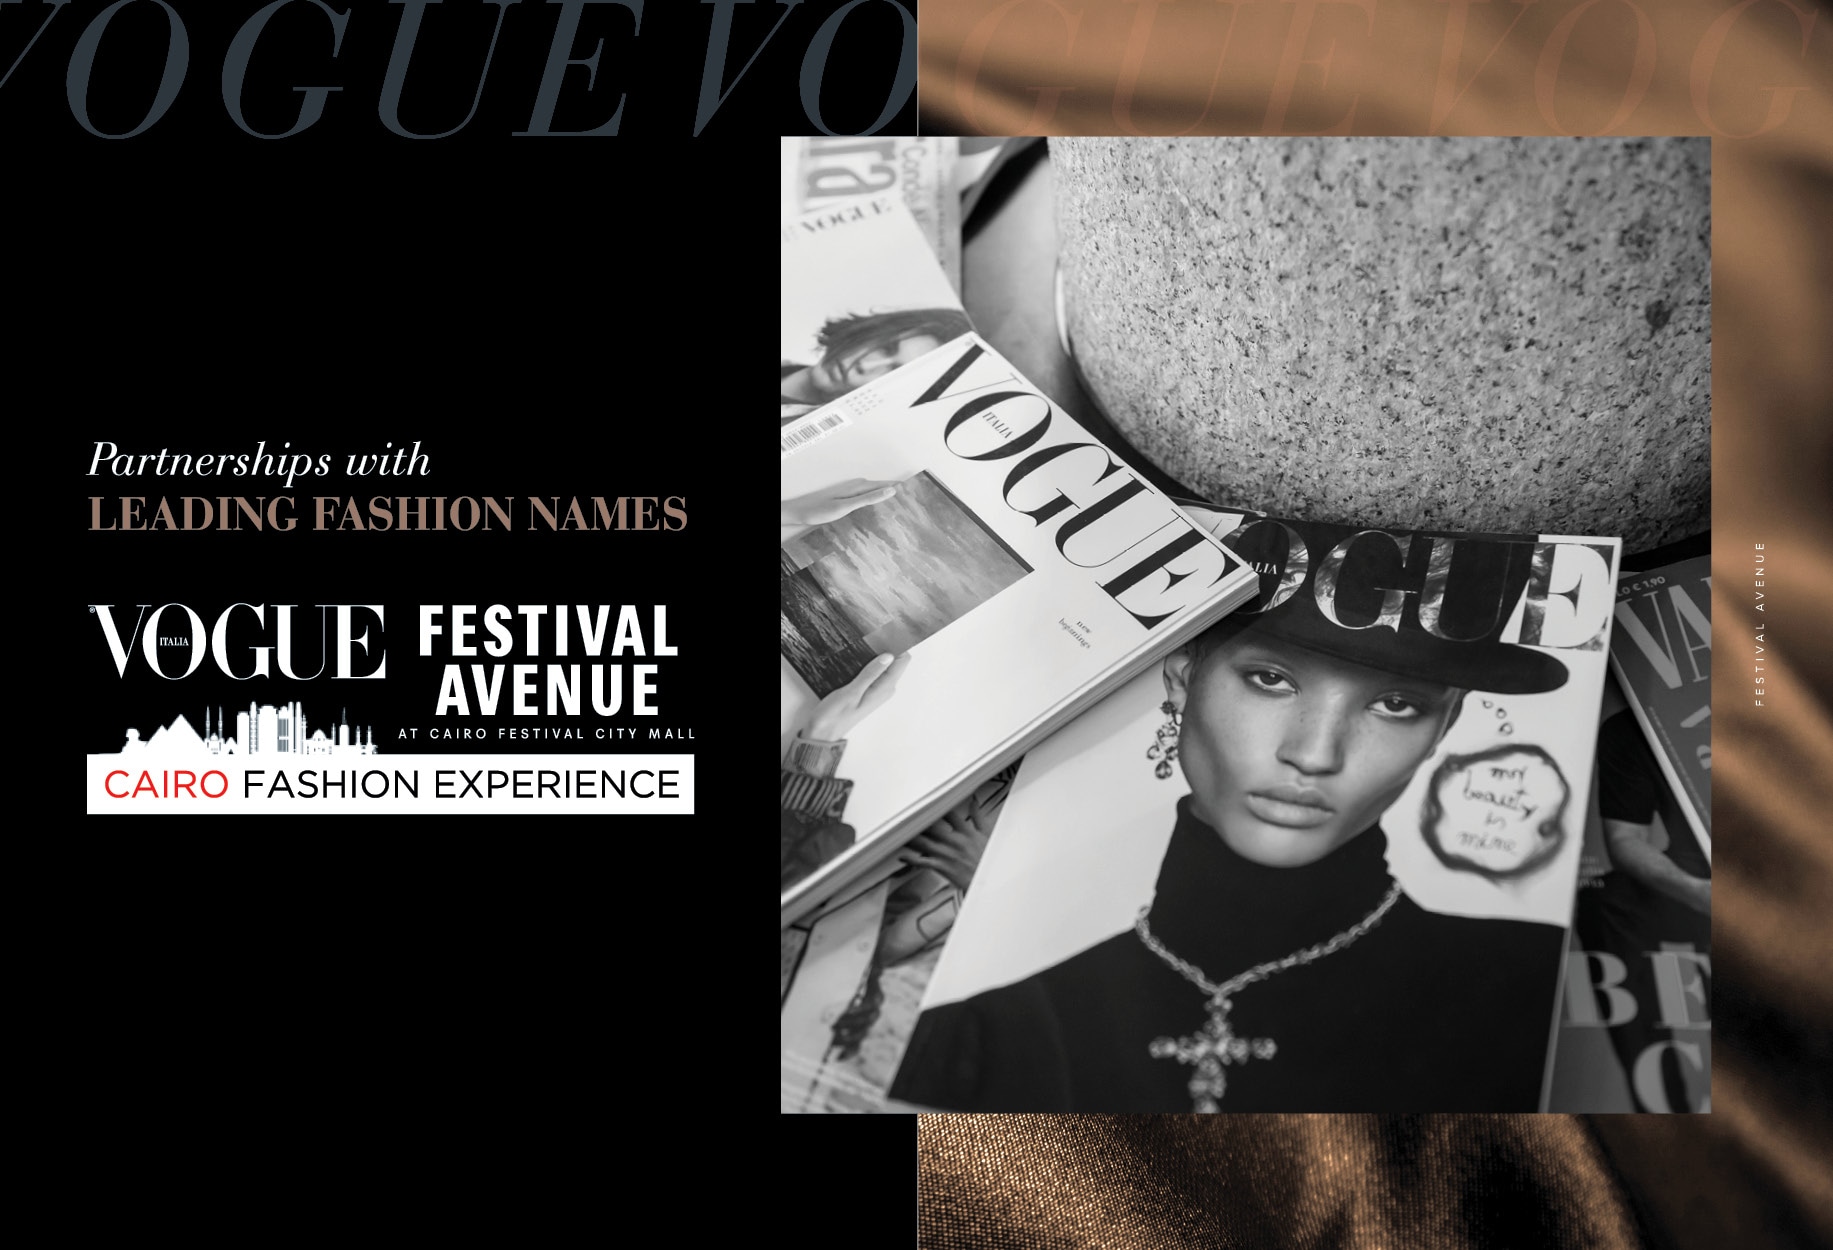 INTRODUCING CAIRO FASHION EXPERIENCE